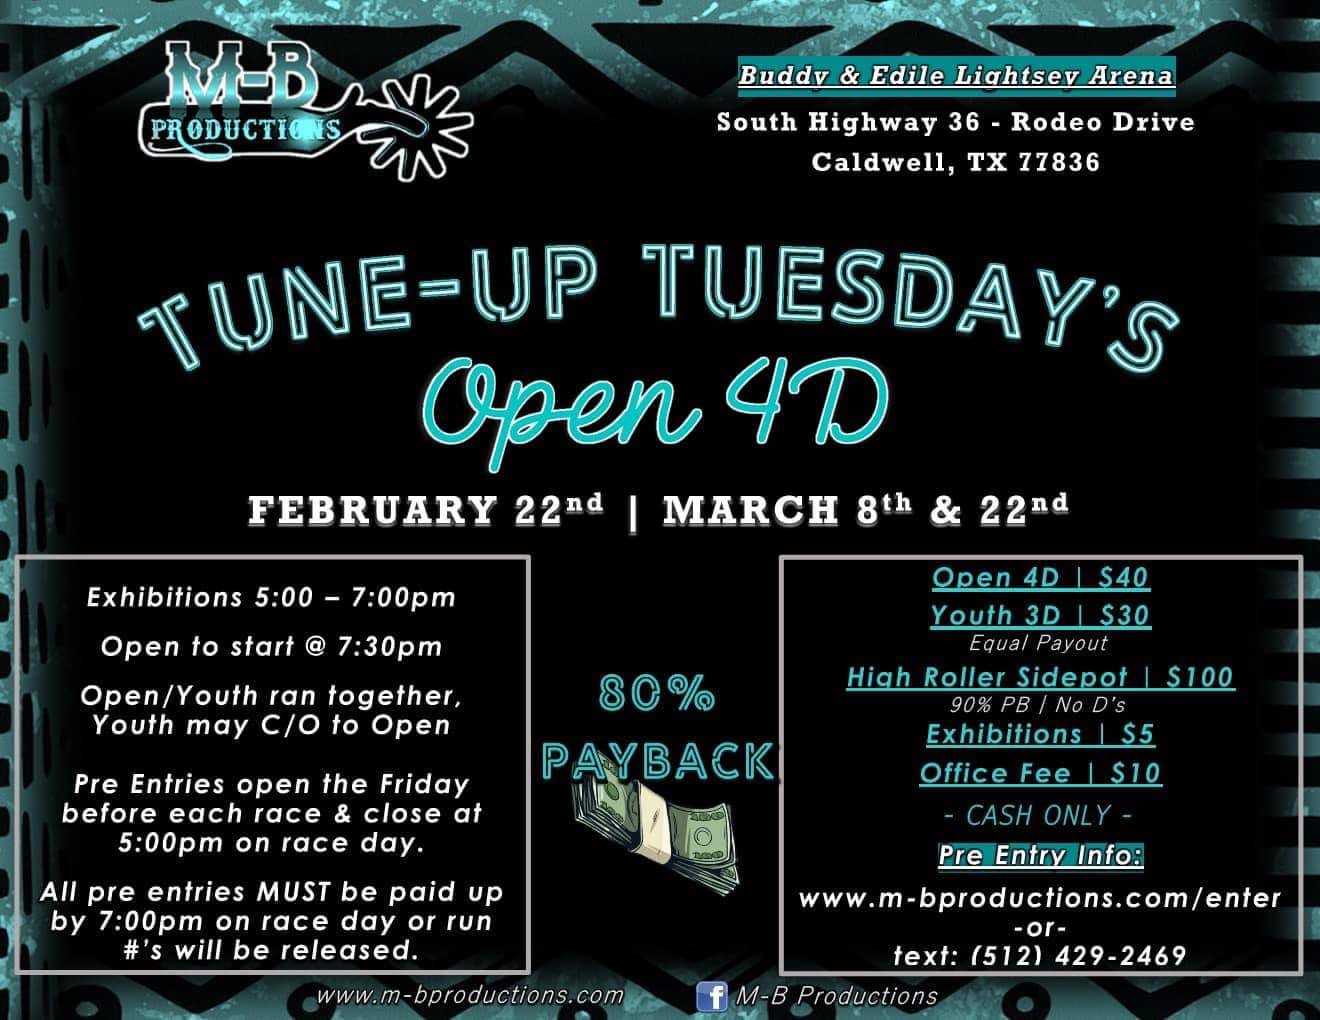 Tune-Up Tuesday's Open 4D